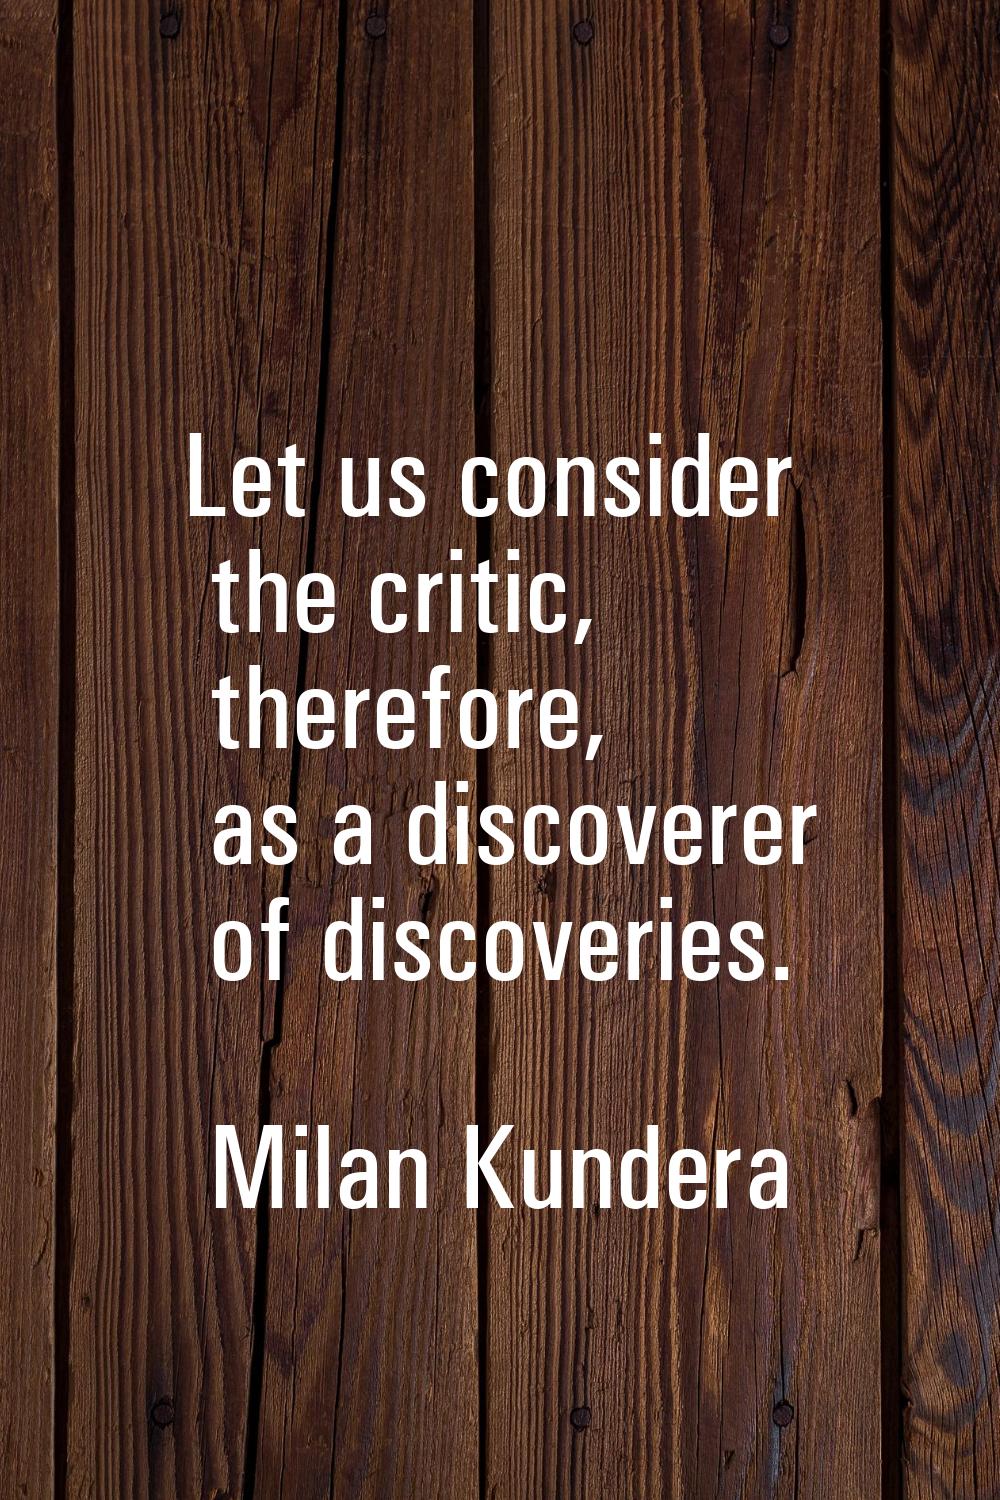 Let us consider the critic, therefore, as a discoverer of discoveries.